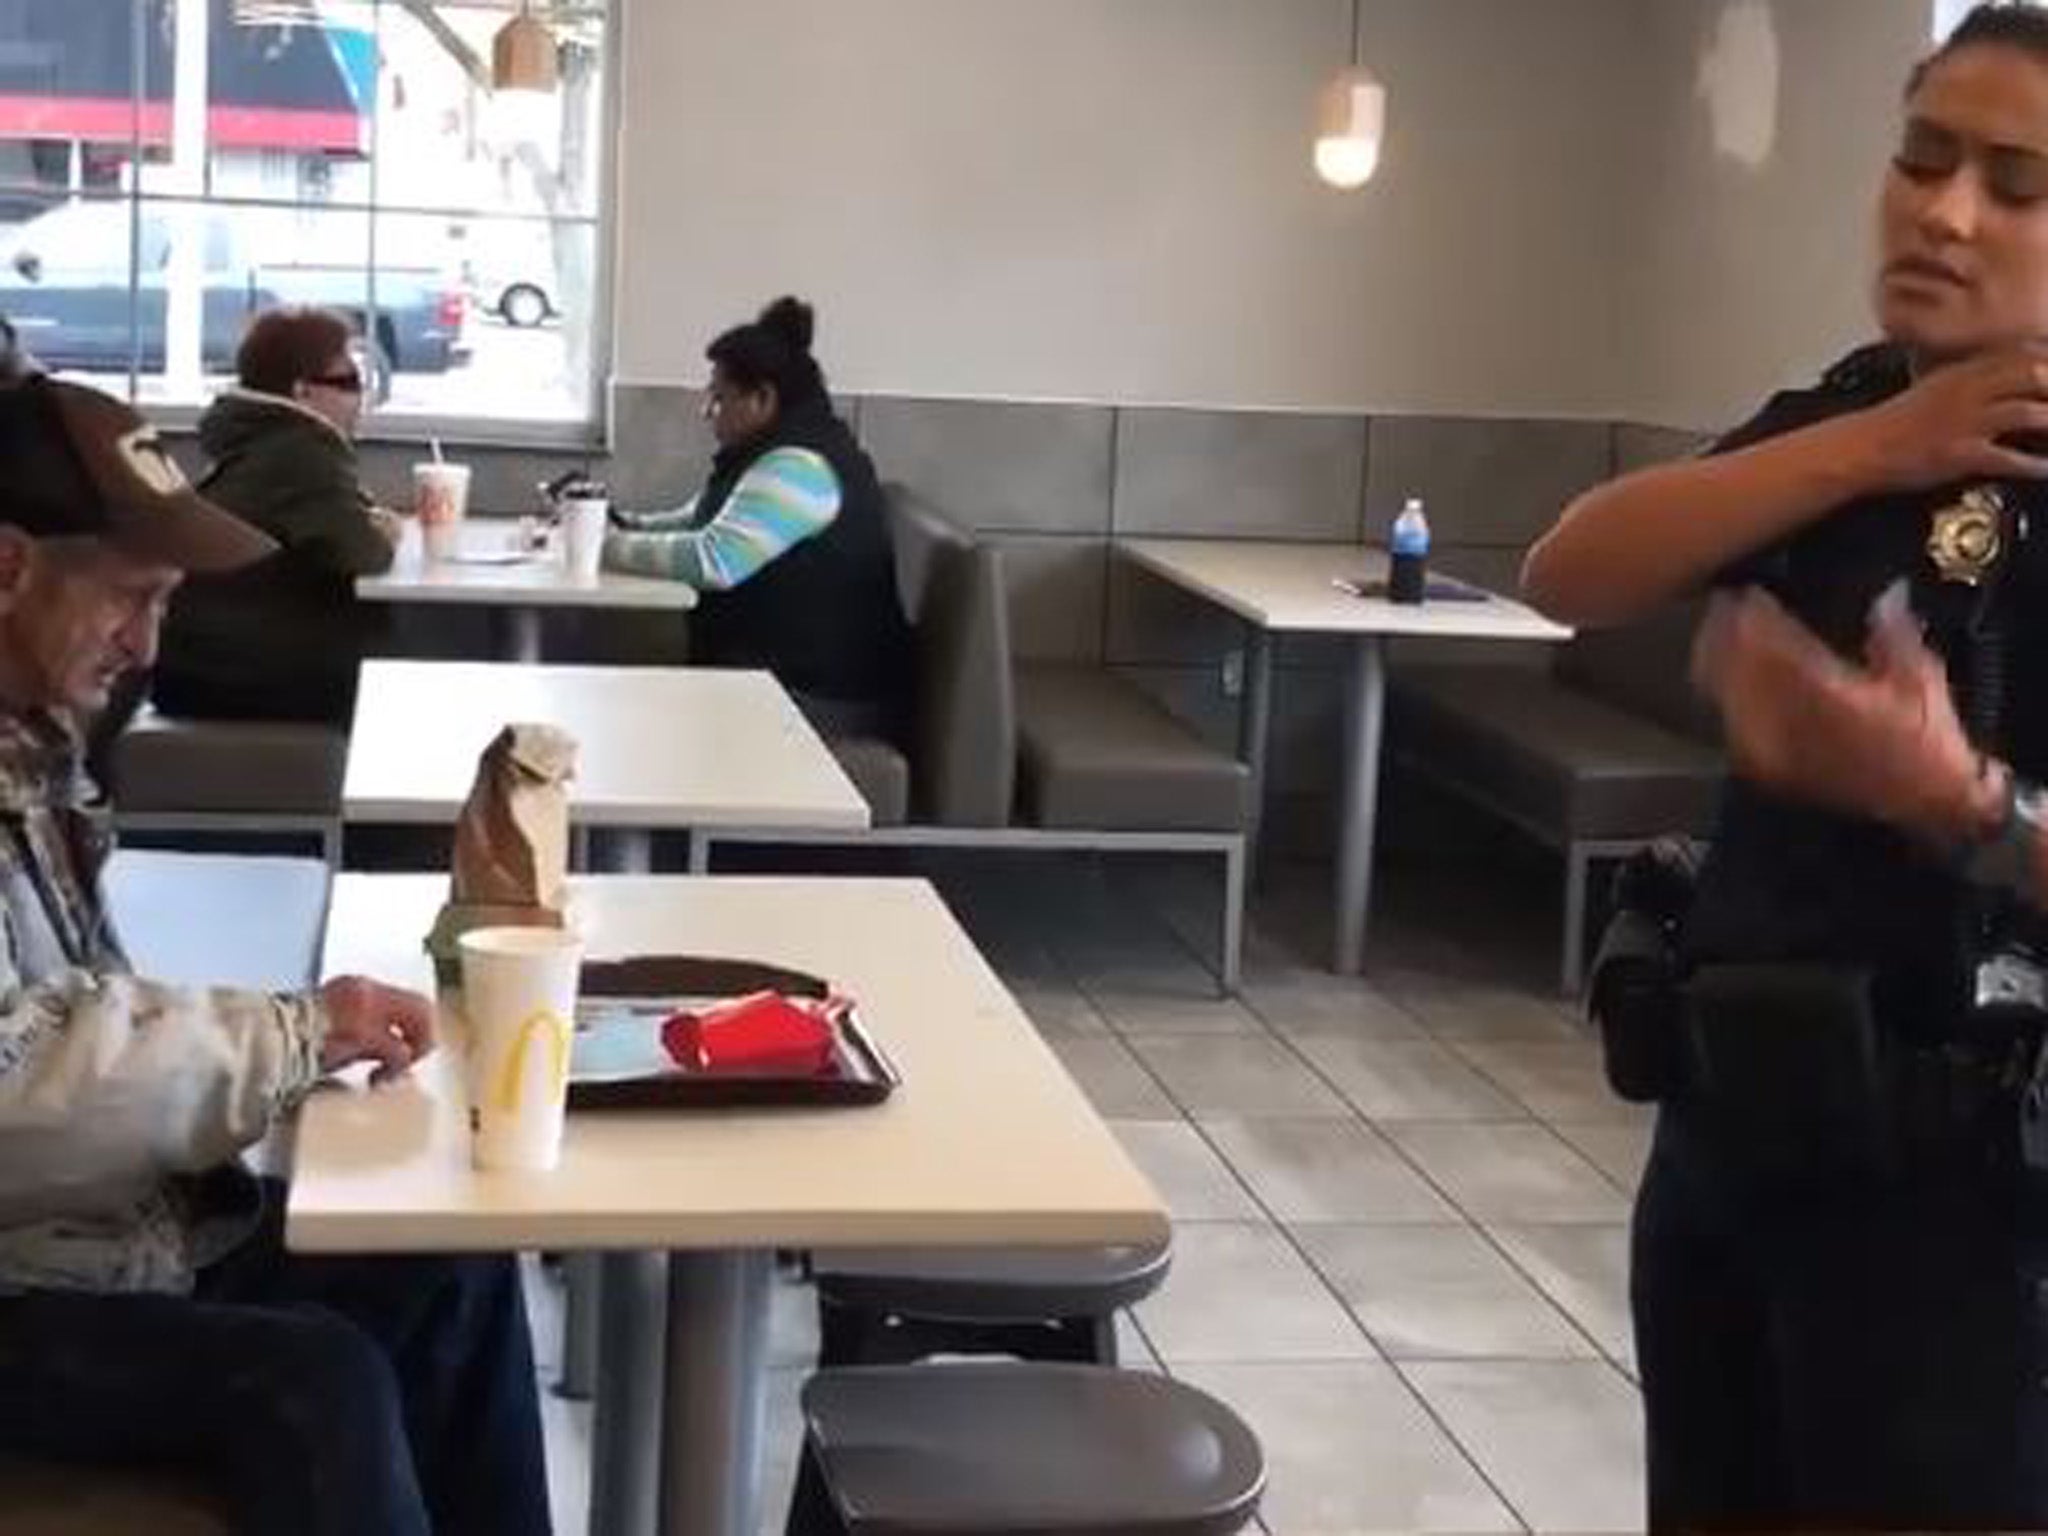 McDonalds kick out homeless man after customer buys him food The Independent The Independent picture